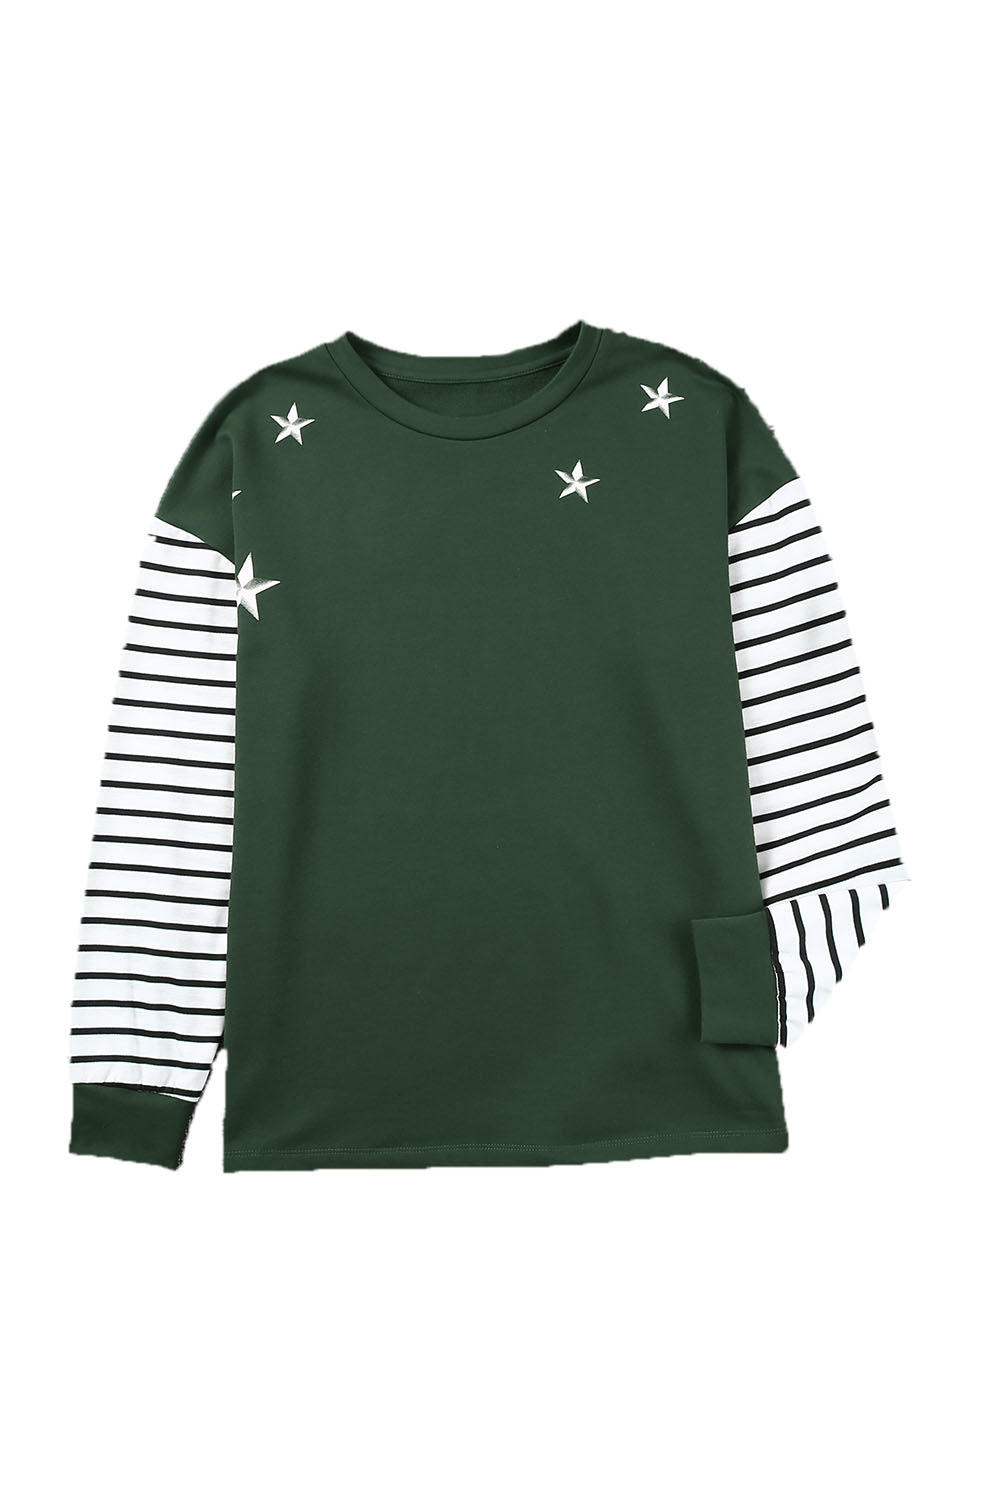 Striped Star Print Patchwork Long Sleeve Top